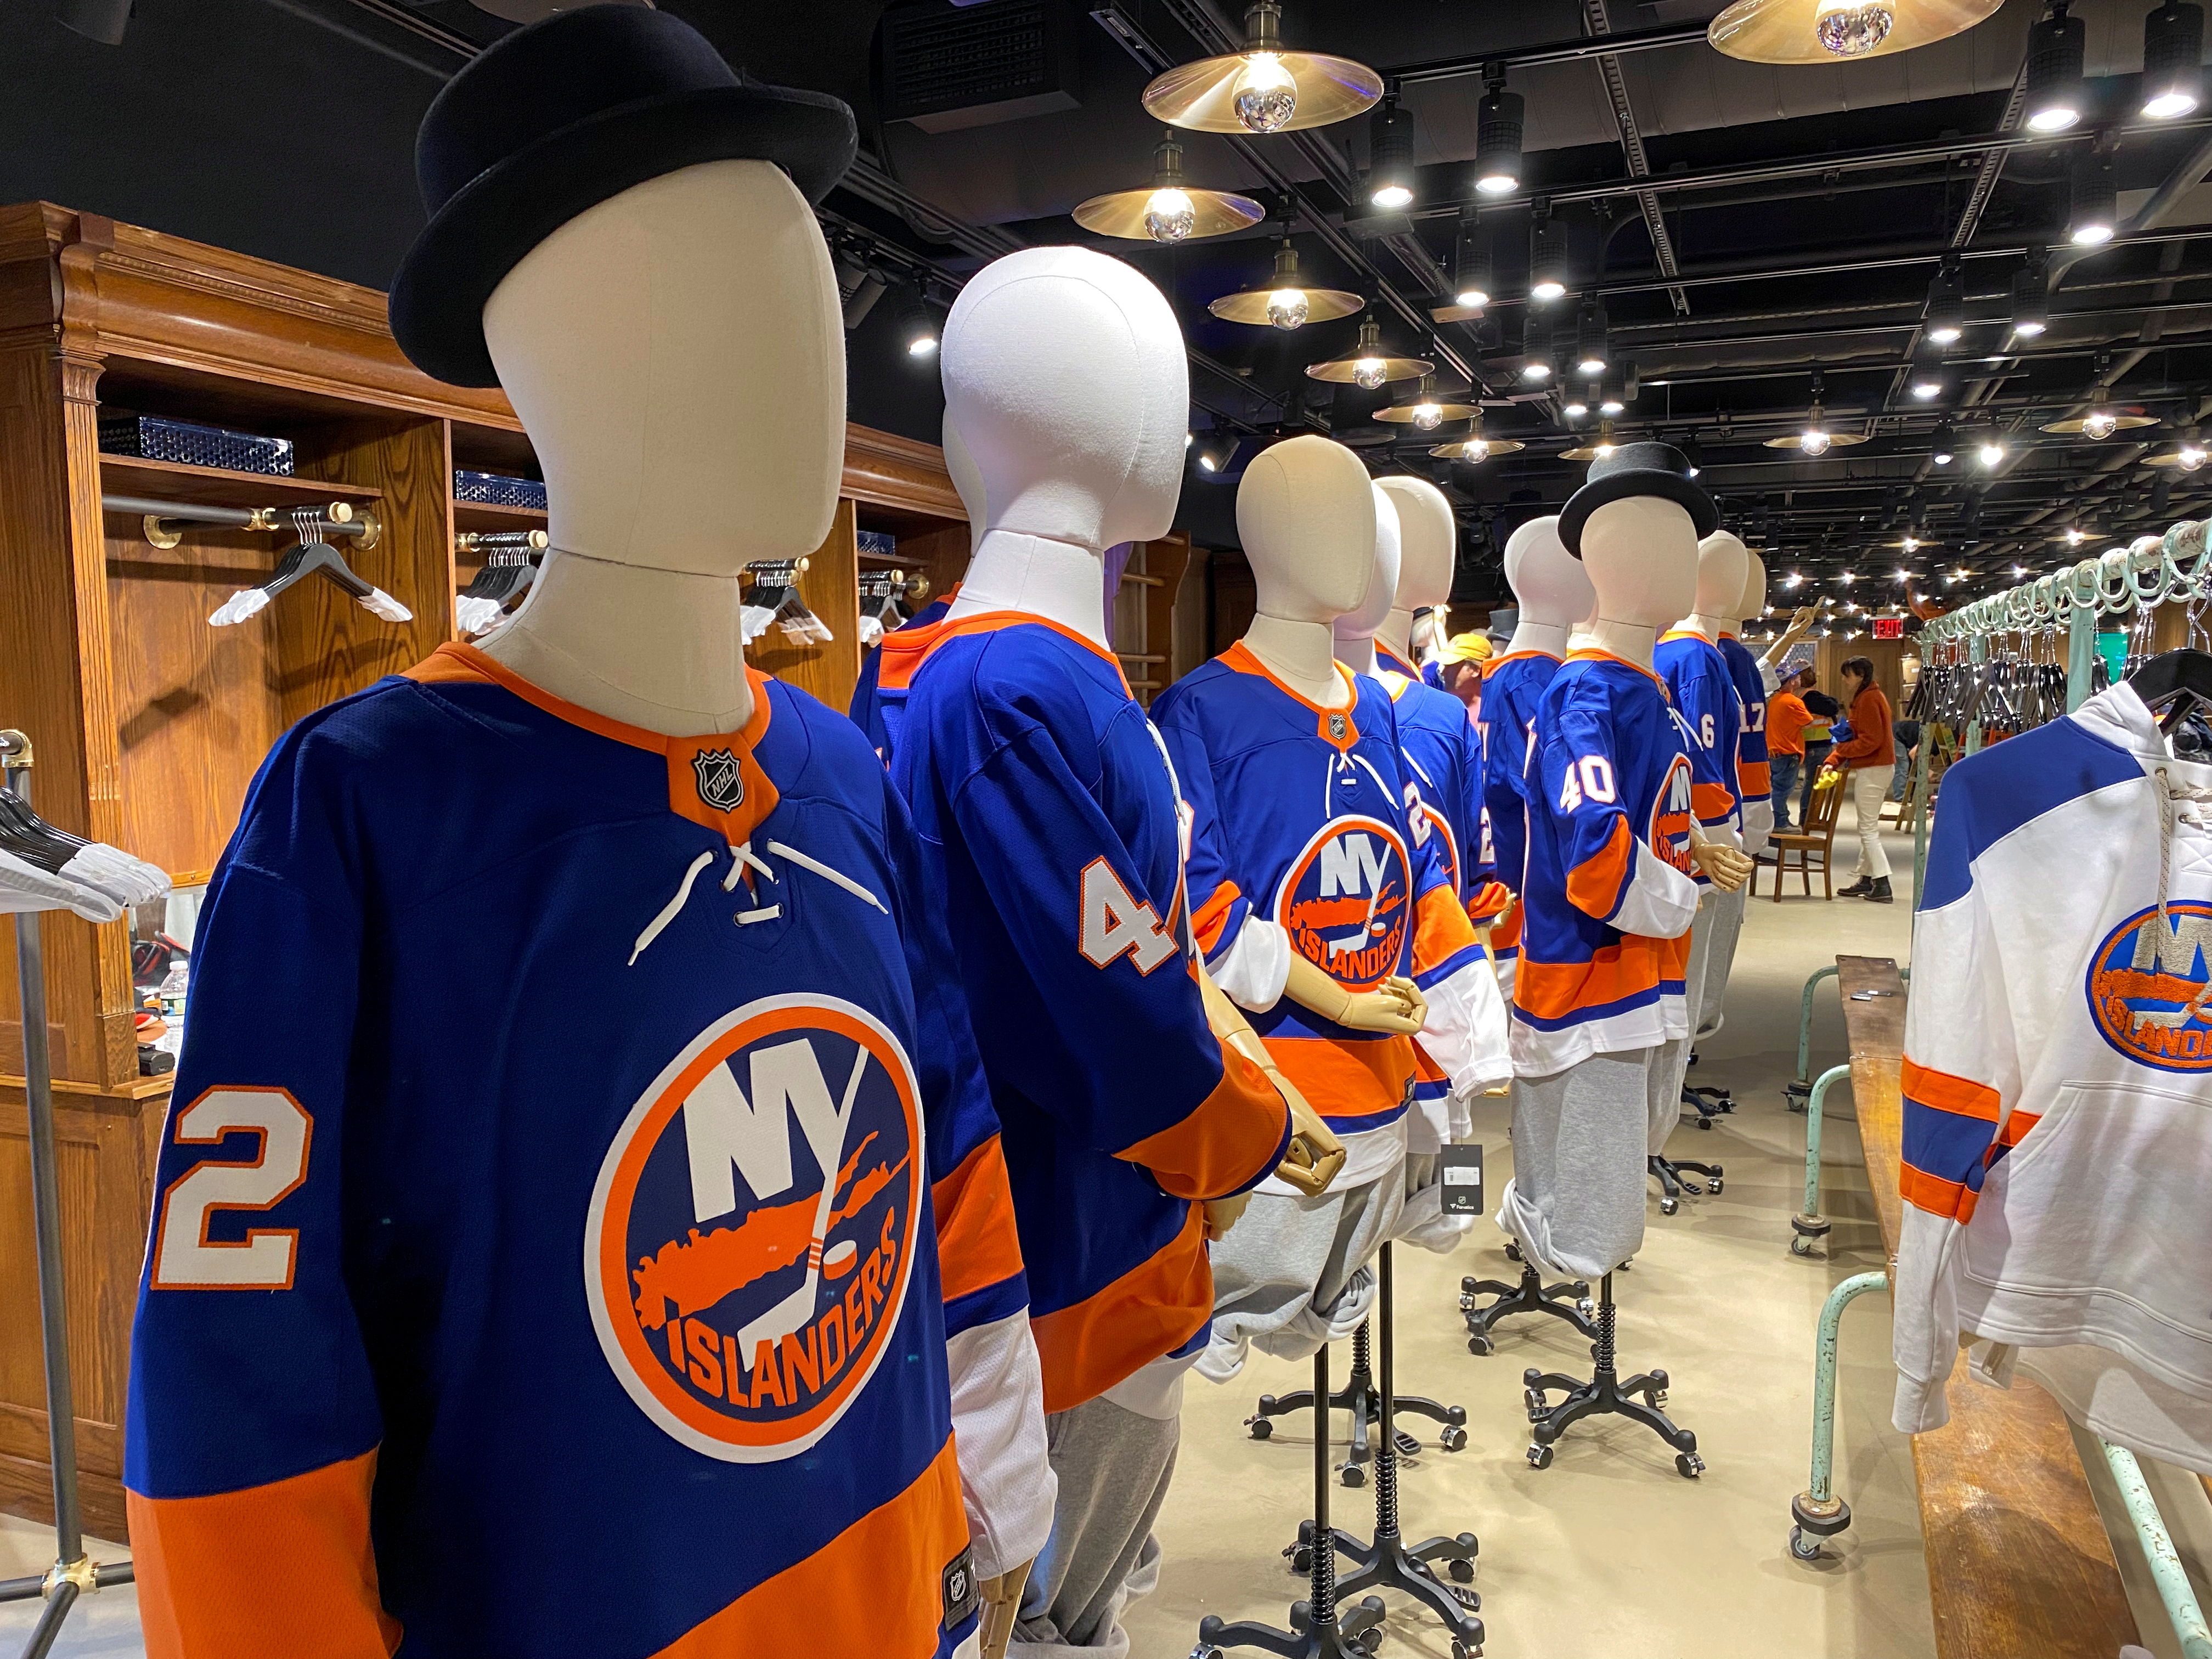 Islanders' jerseys are displayed inside a team store at UBS Arena in Elmont, New York